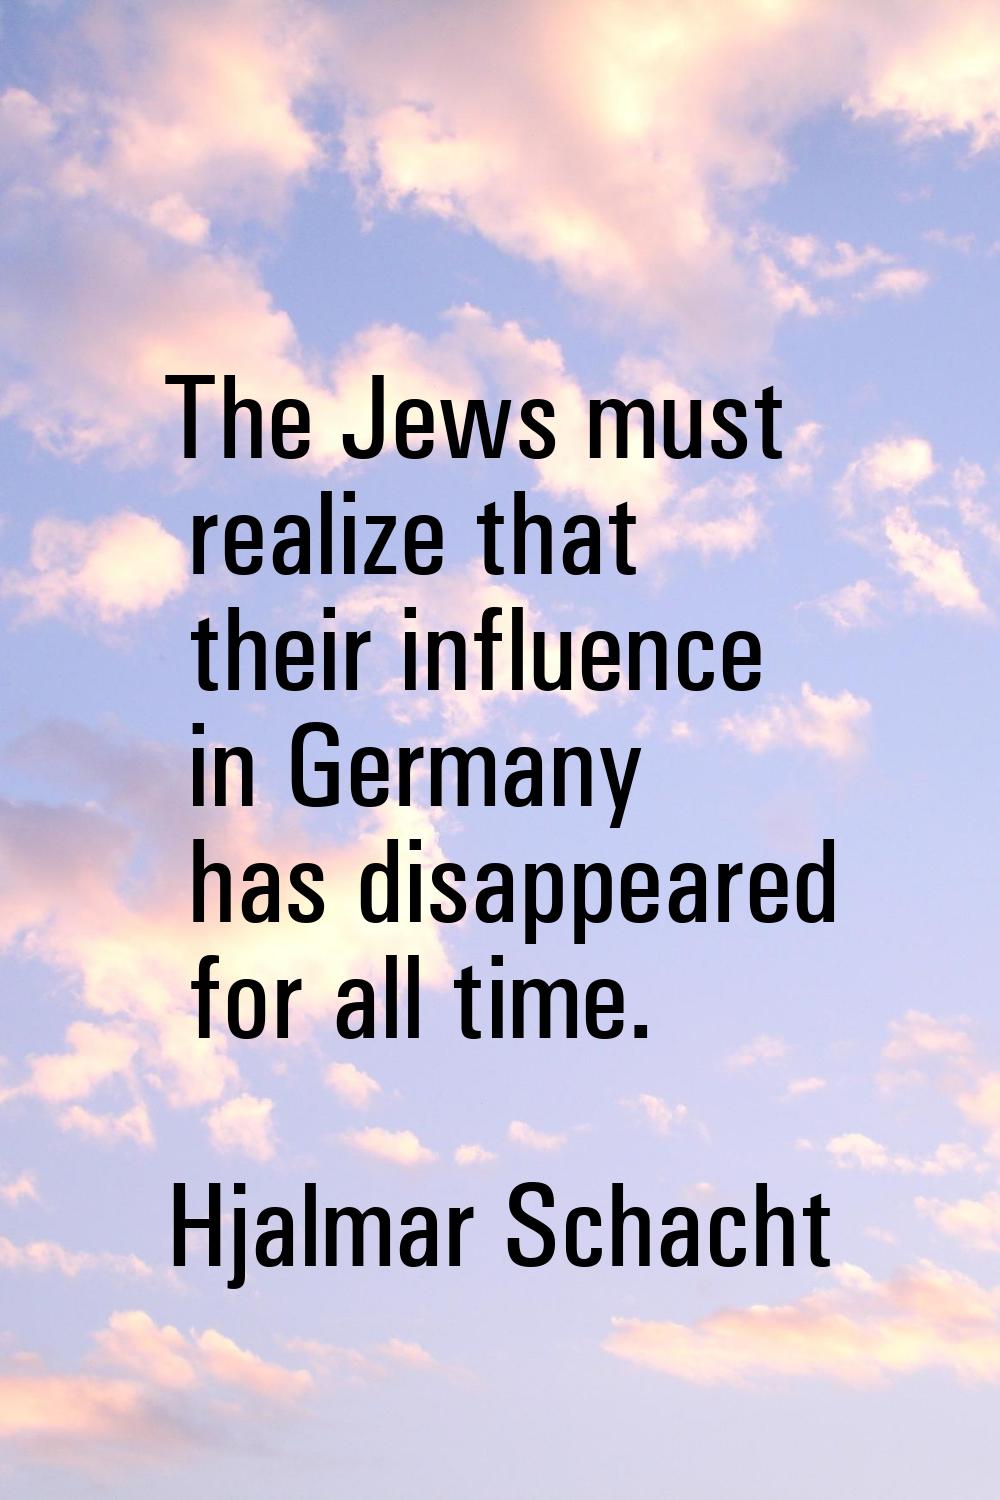 The Jews must realize that their influence in Germany has disappeared for all time.